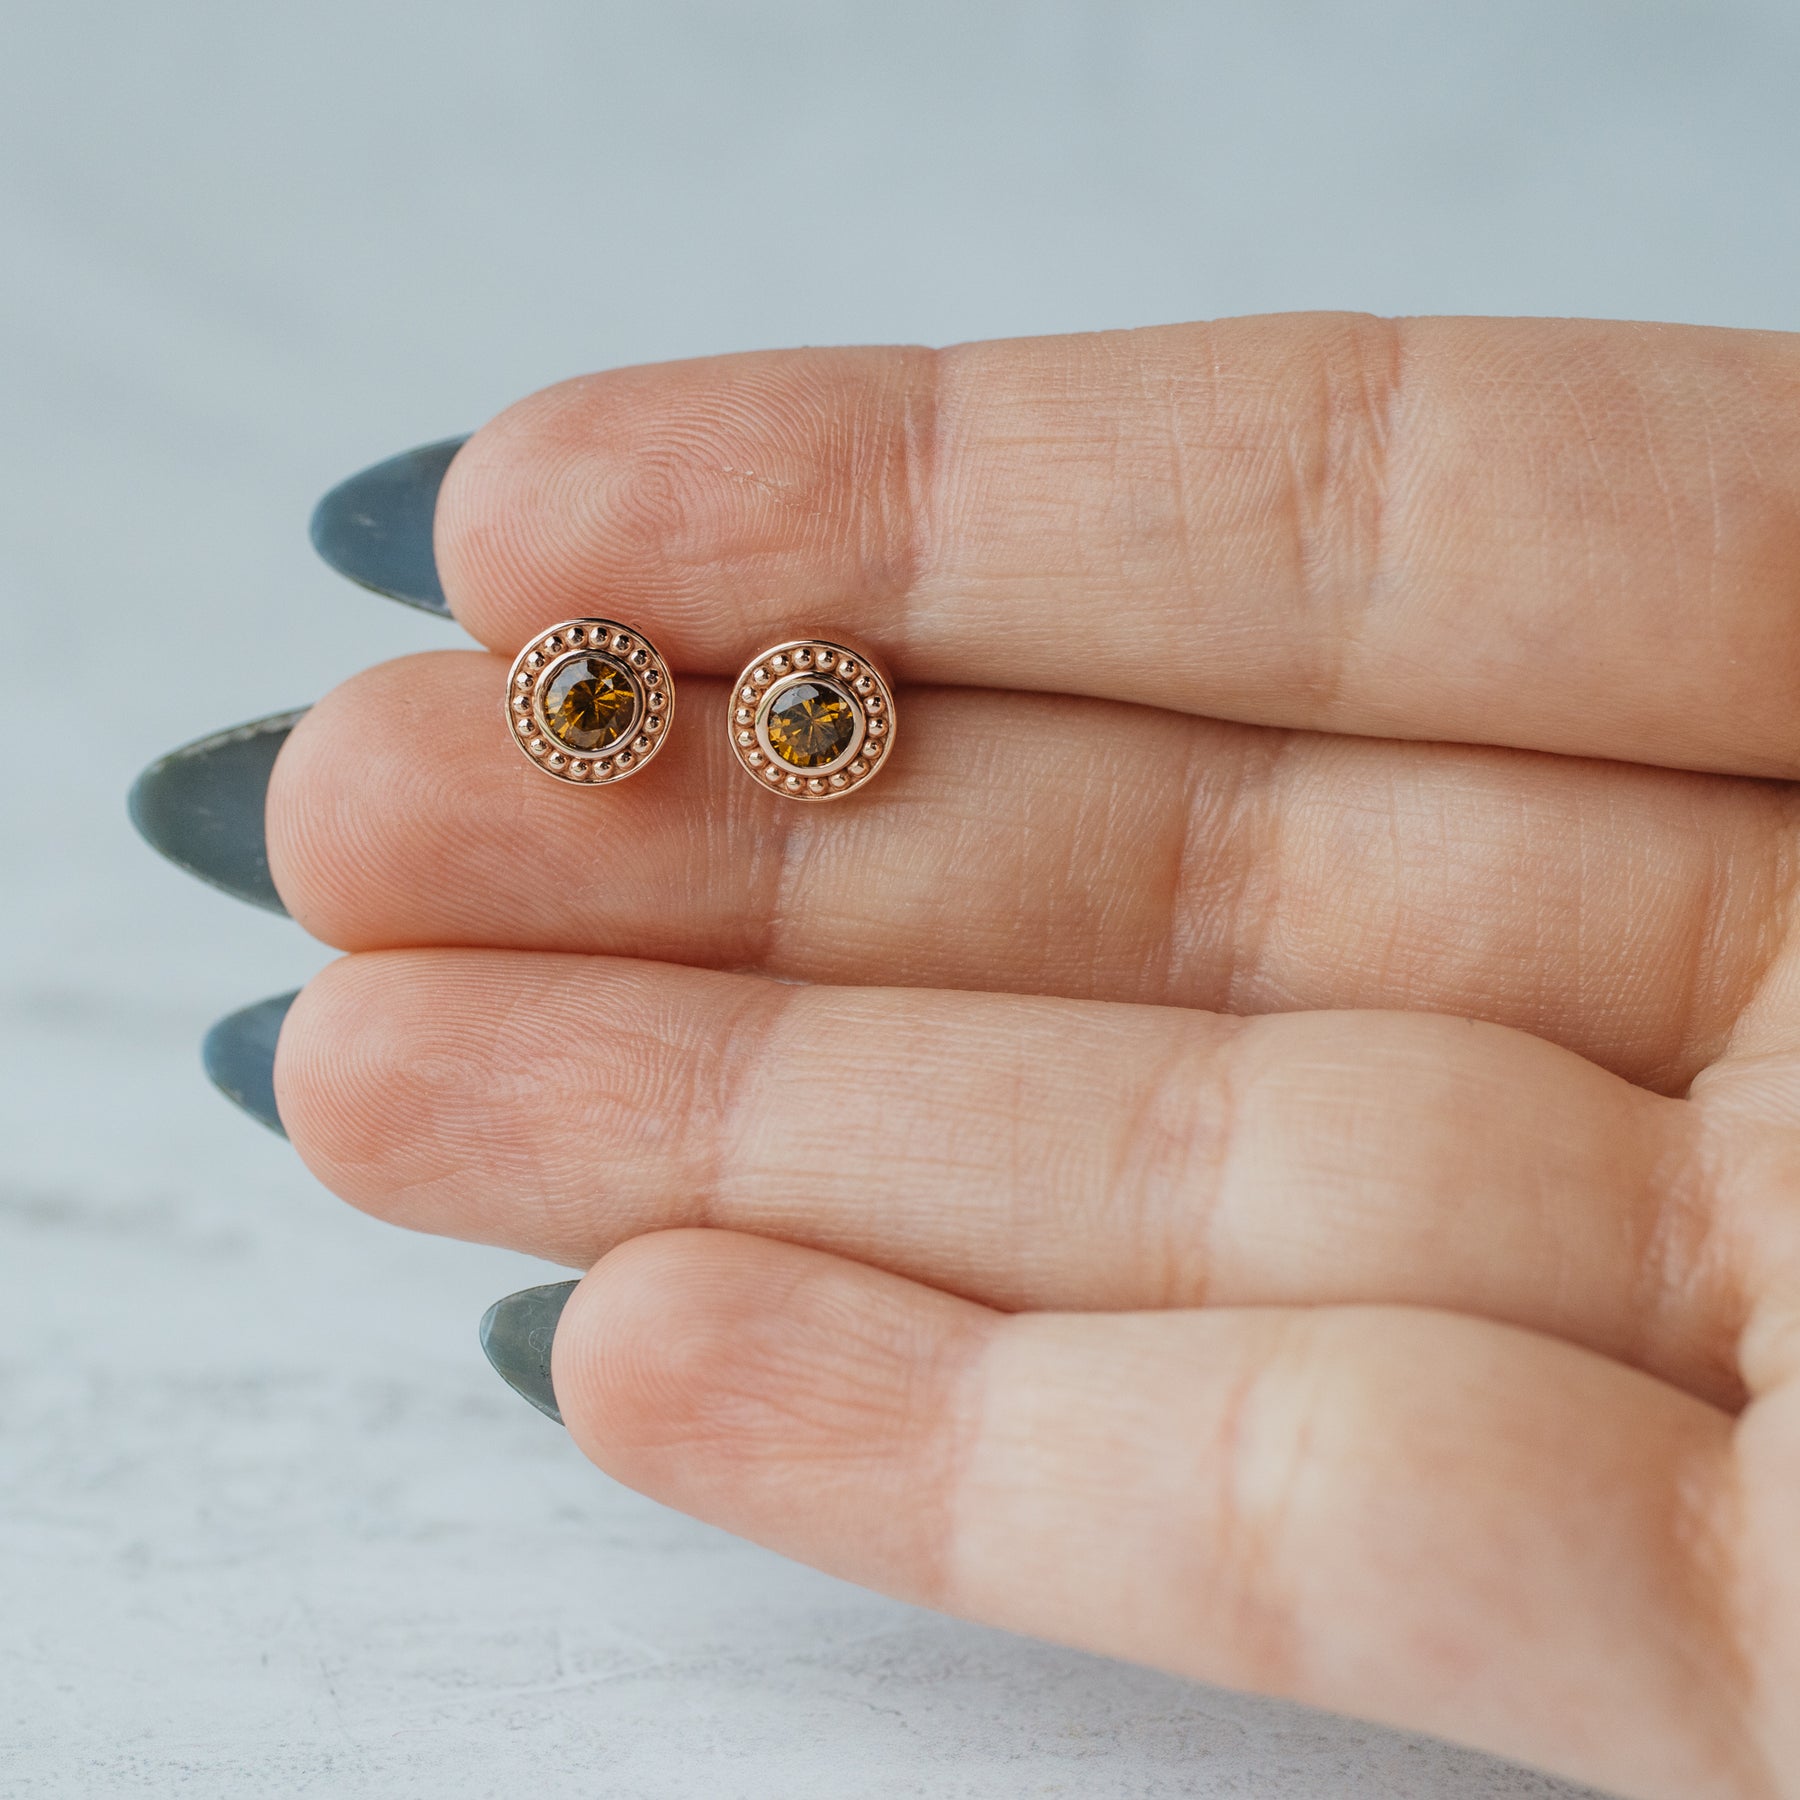 Round Andradite Garnet and Rose Gold Stud Earrings